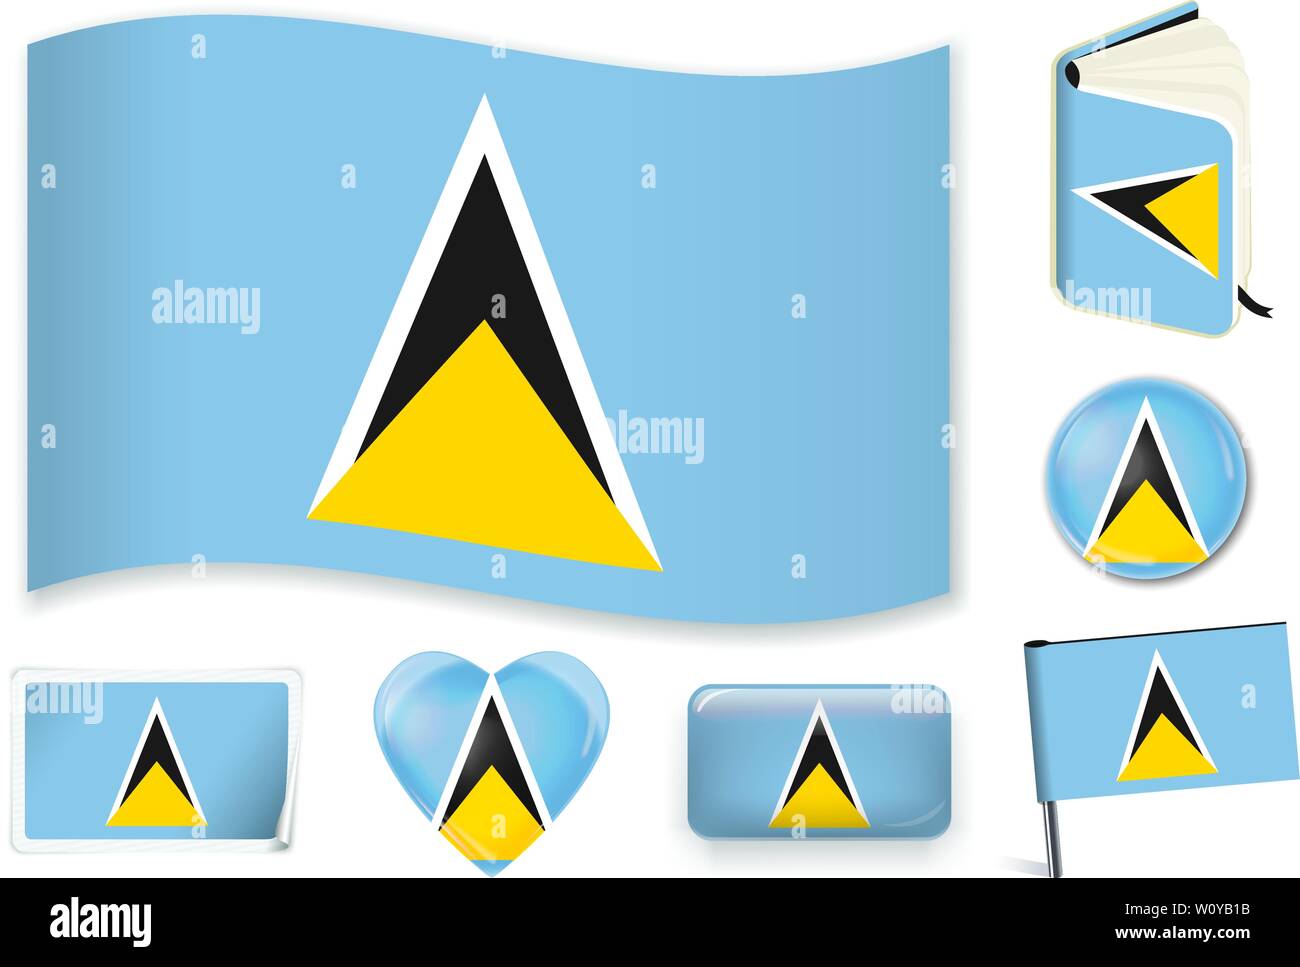 Saint Lucia national flag. Vector illustration. 3 layers. Shadows, flat flag, lights and shadows. Collection of 220 world flags. Accurate colors. Easy changes. Stock Vector